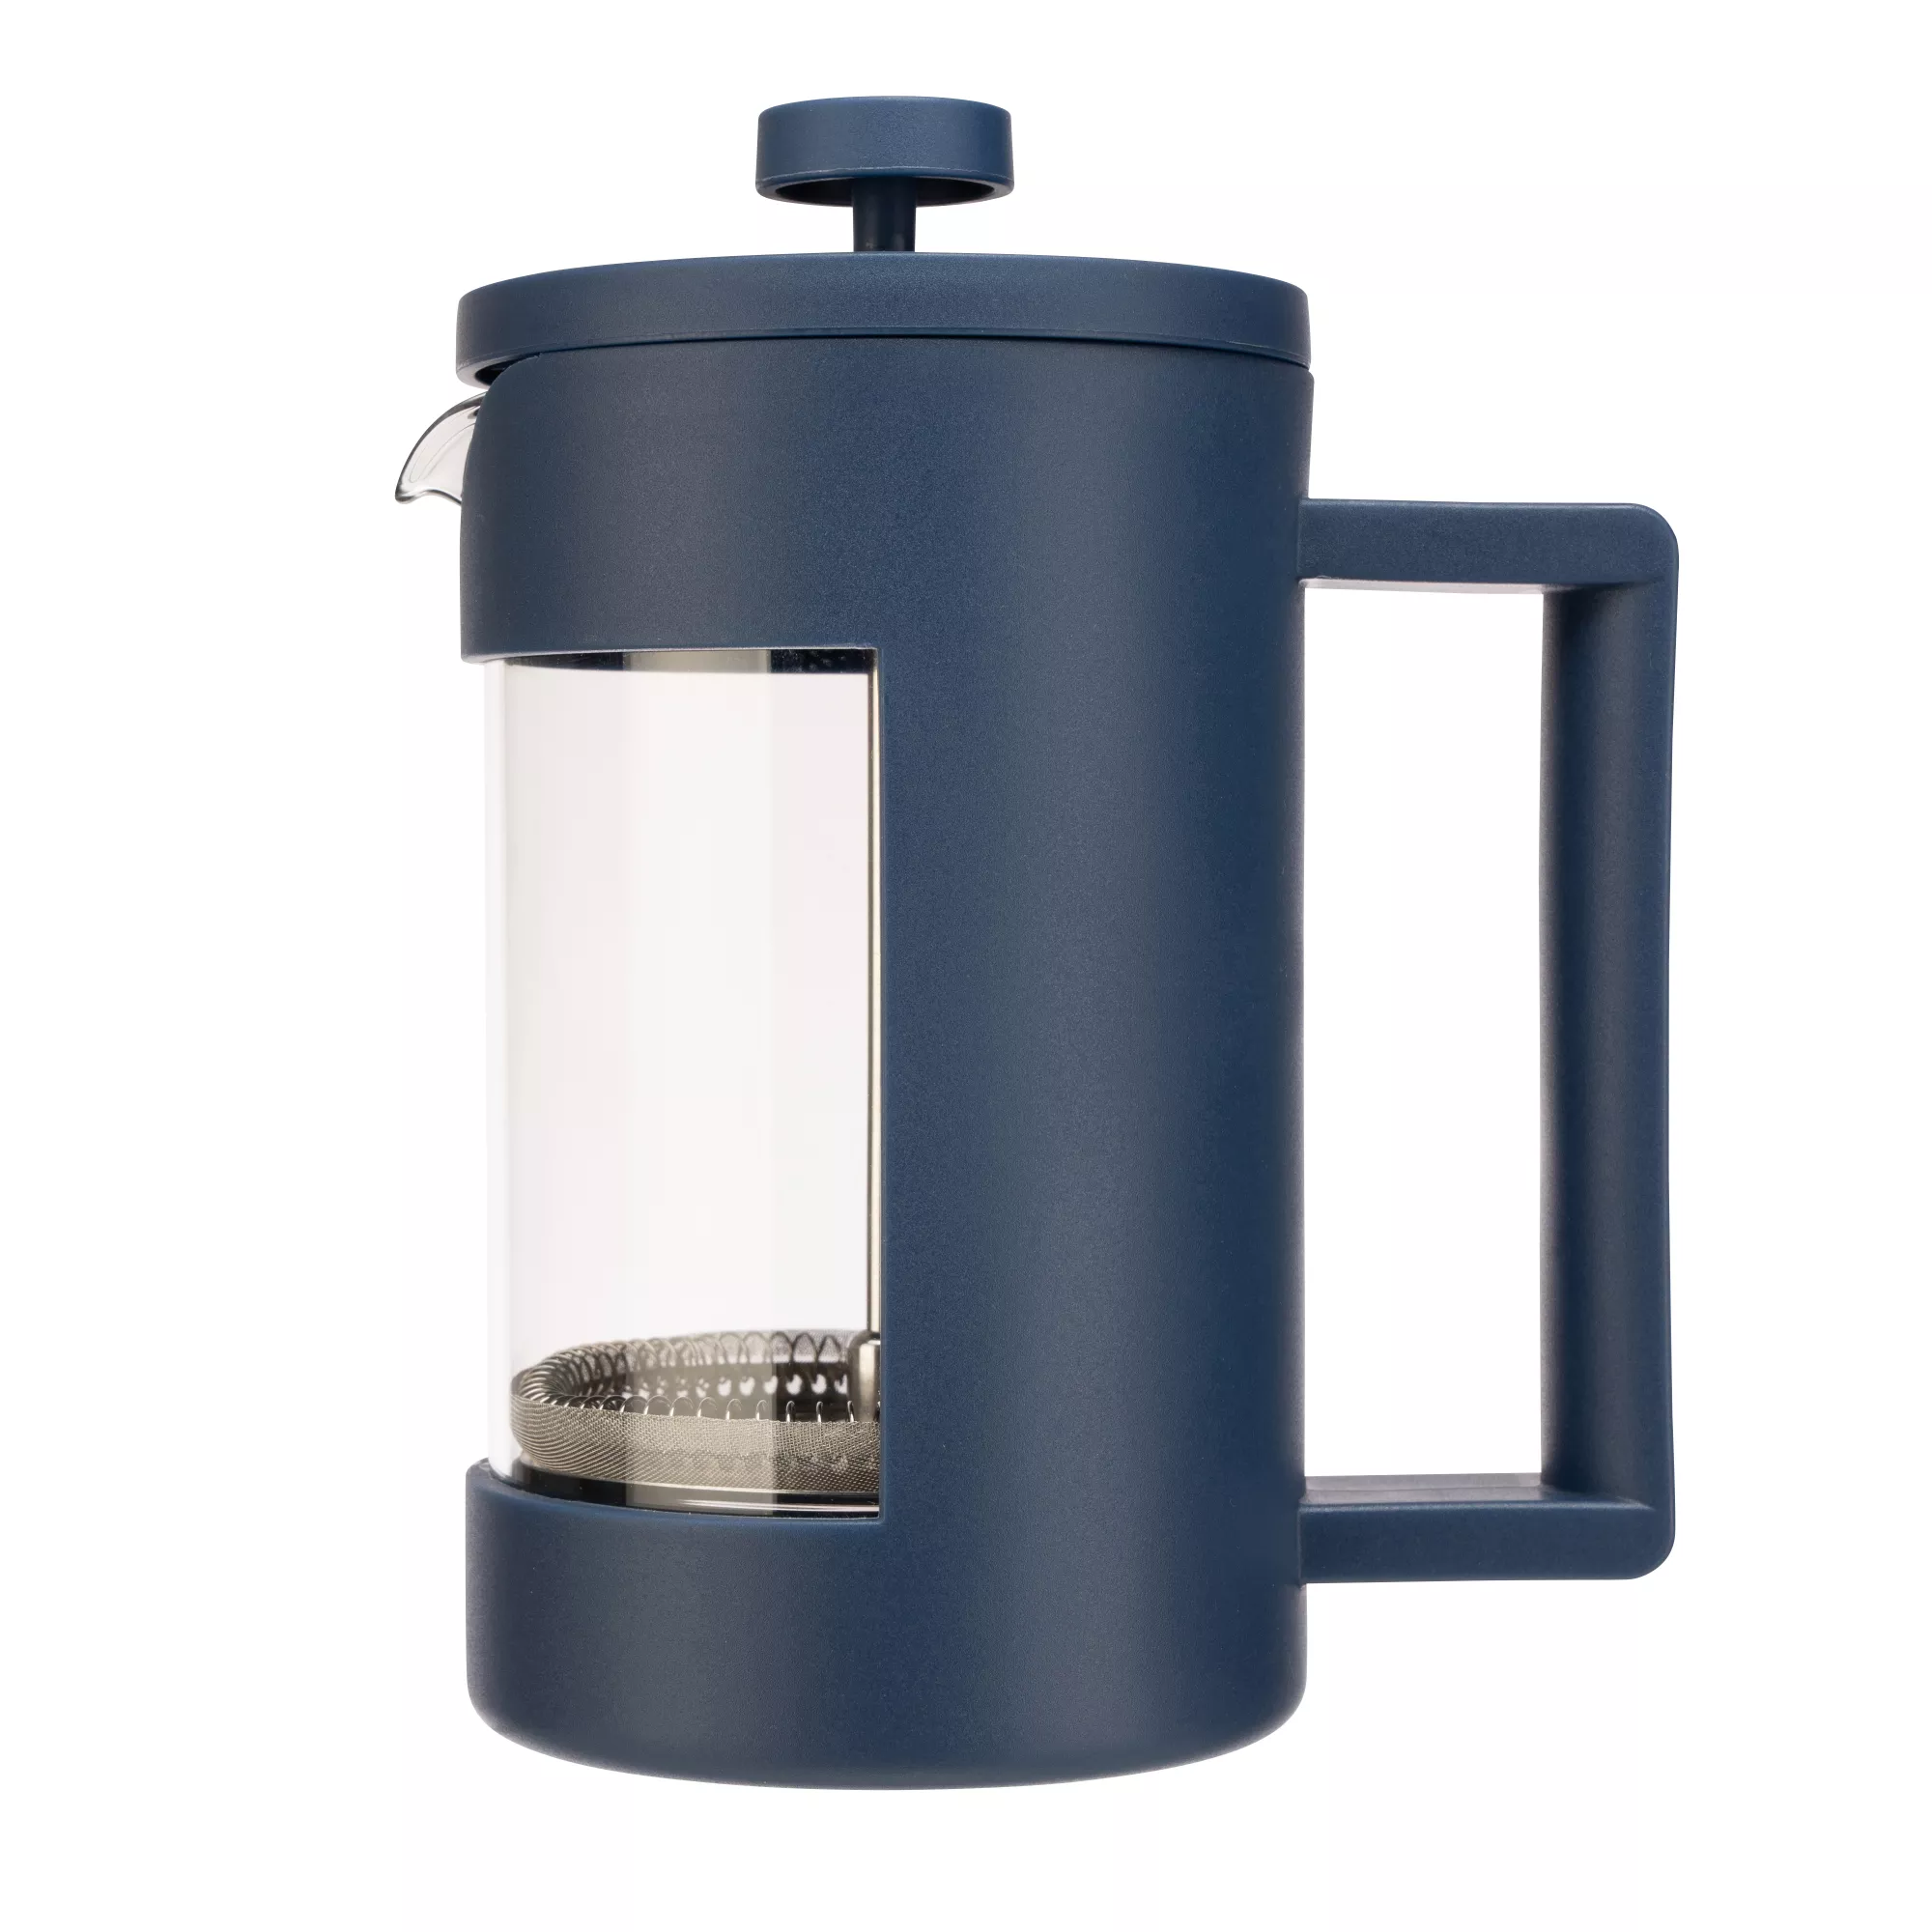 Cafetiere 6 Cup - Navy